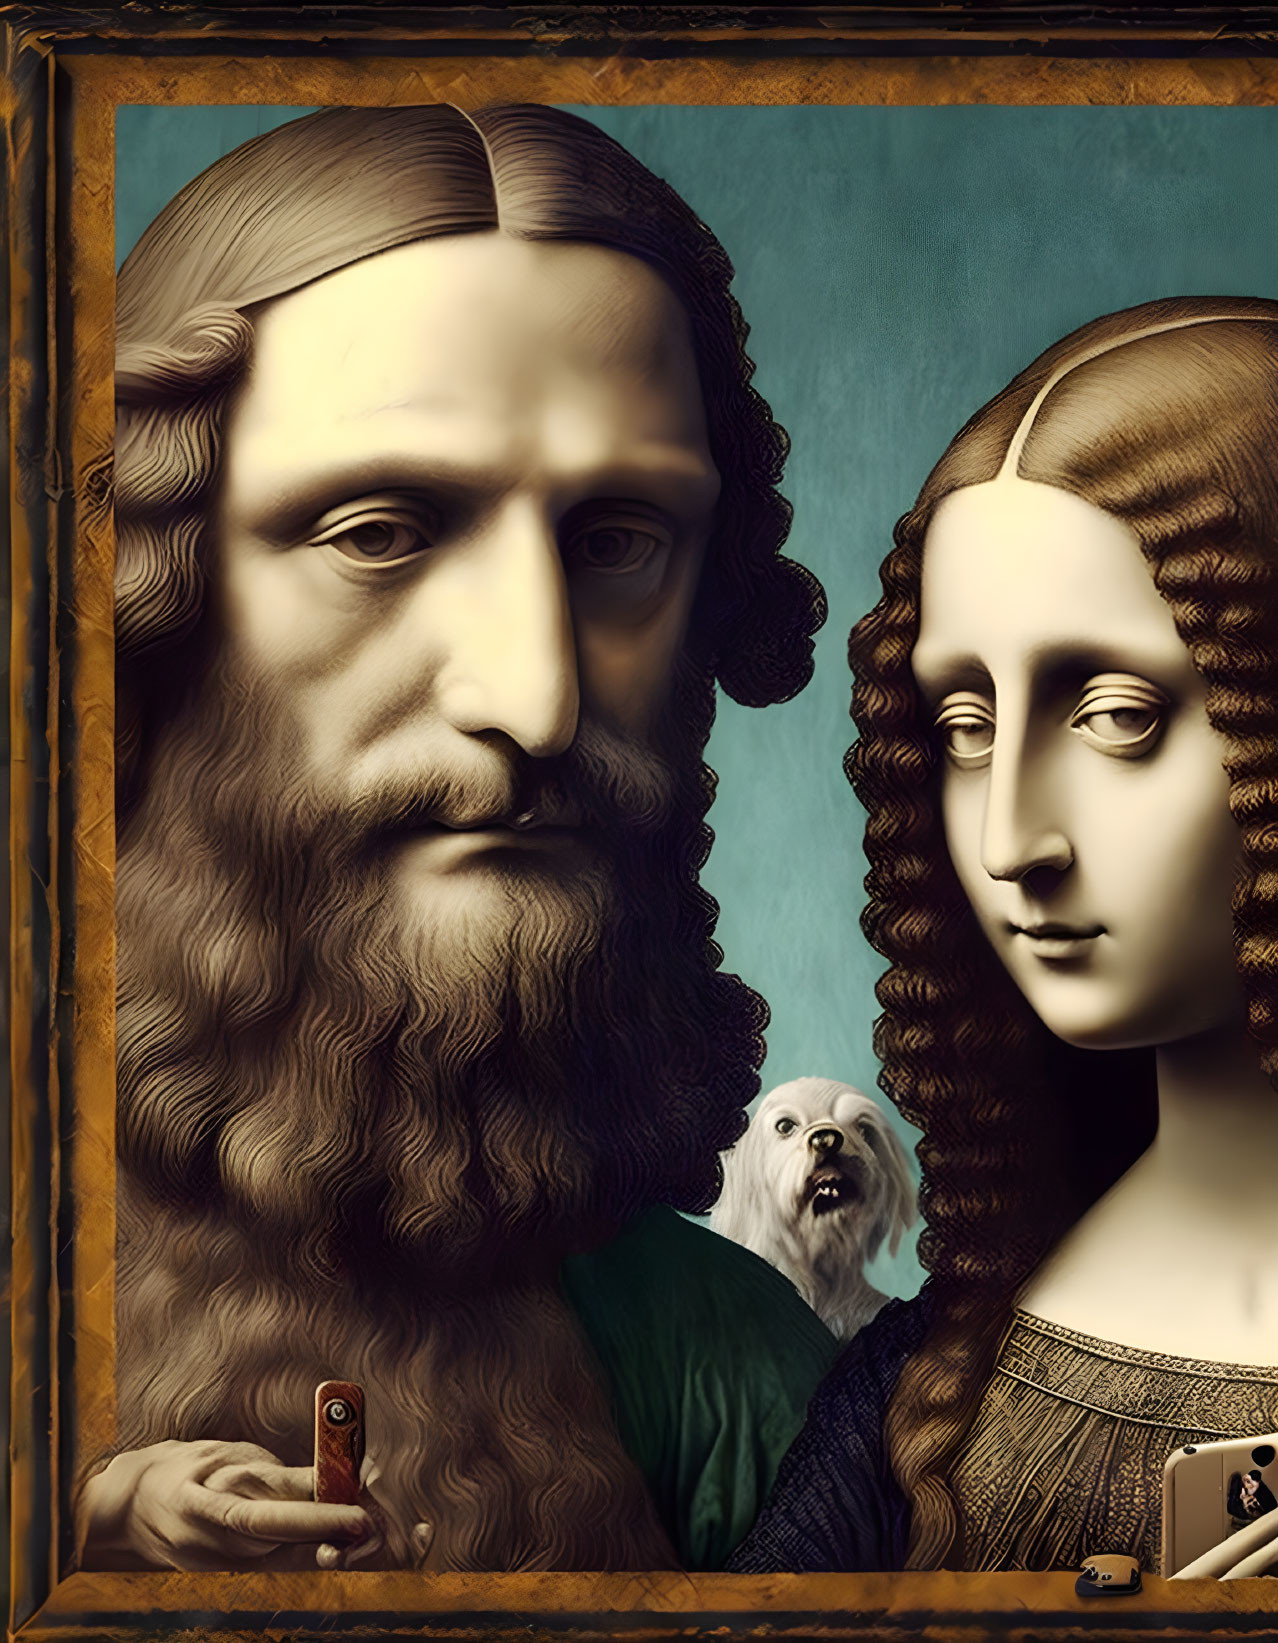 Surreal painting of bearded man, woman in vintage attire, and white dog